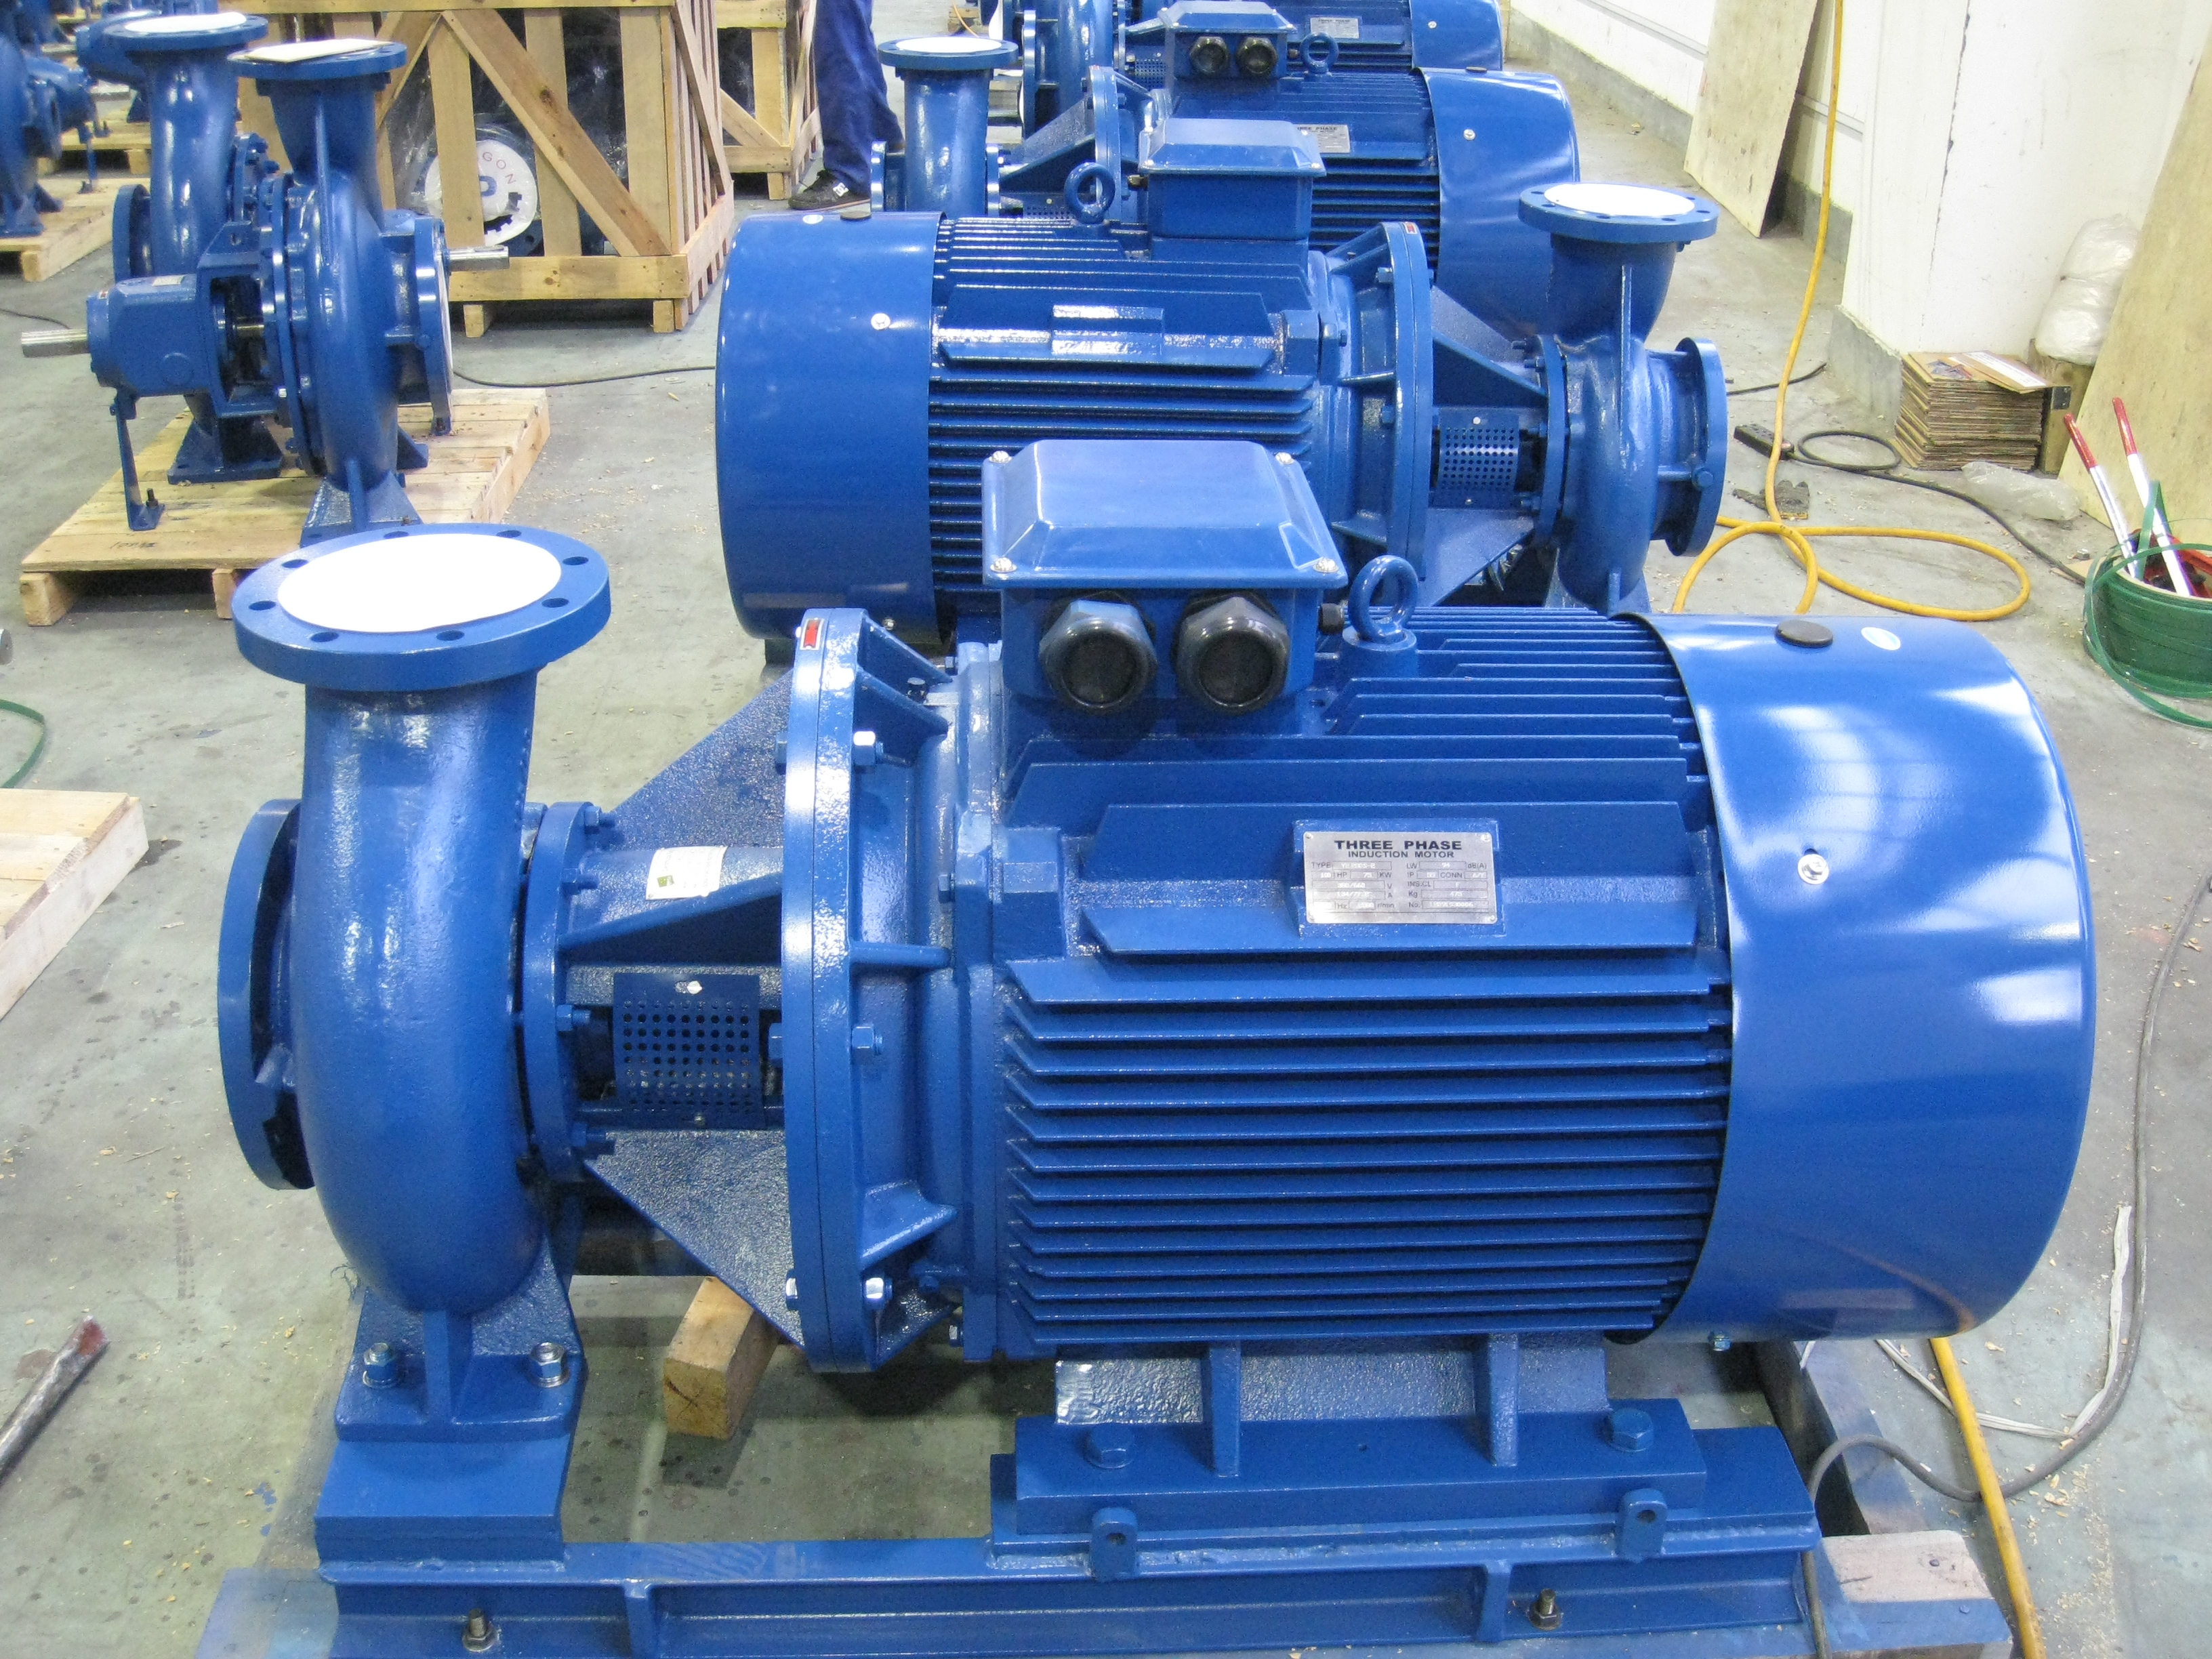 Best Single Stage Electric Jet Centrifugal Pump